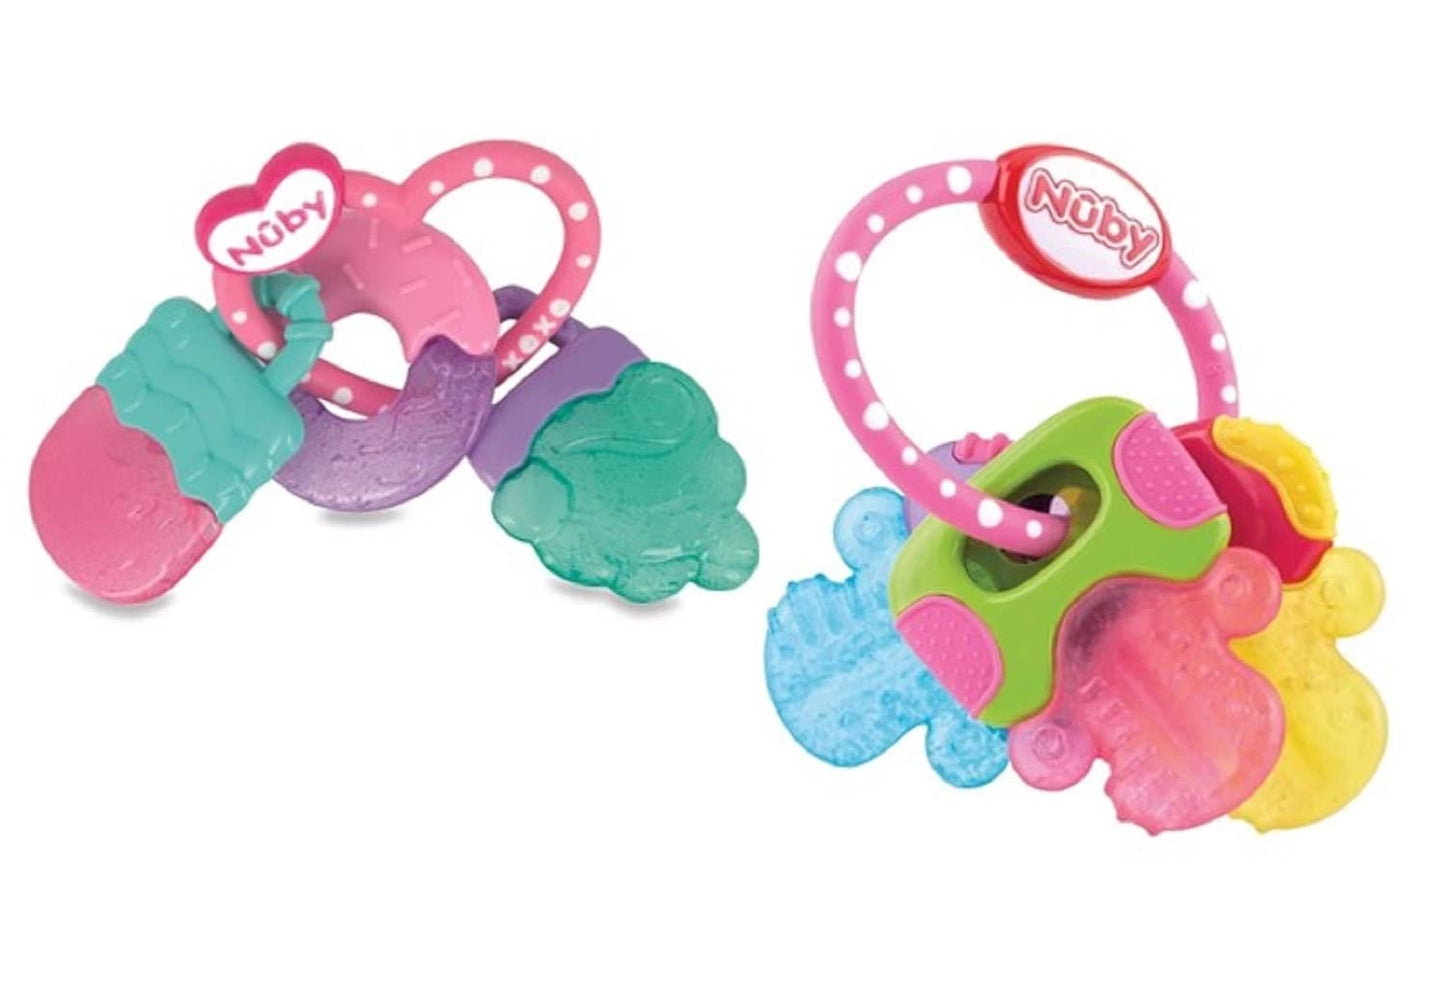 Nuby IcyBite Popsicle, Donut and Ice Cream Teether Ring and Ice Gel Teether Keys - 3+ Months